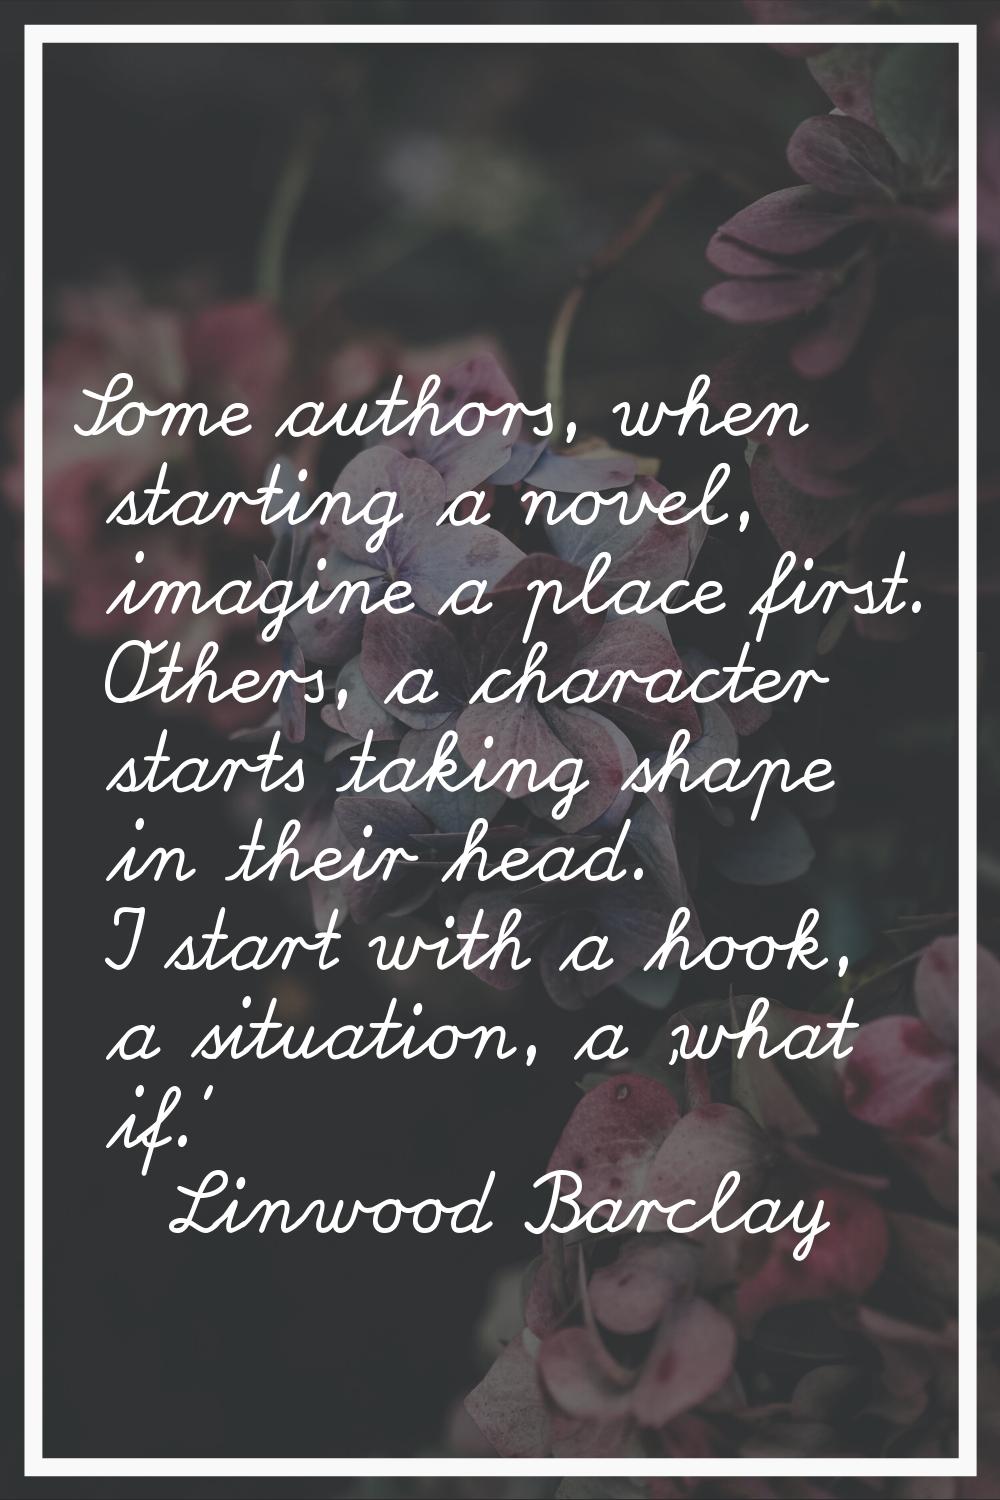 Some authors, when starting a novel, imagine a place first. Others, a character starts taking shape